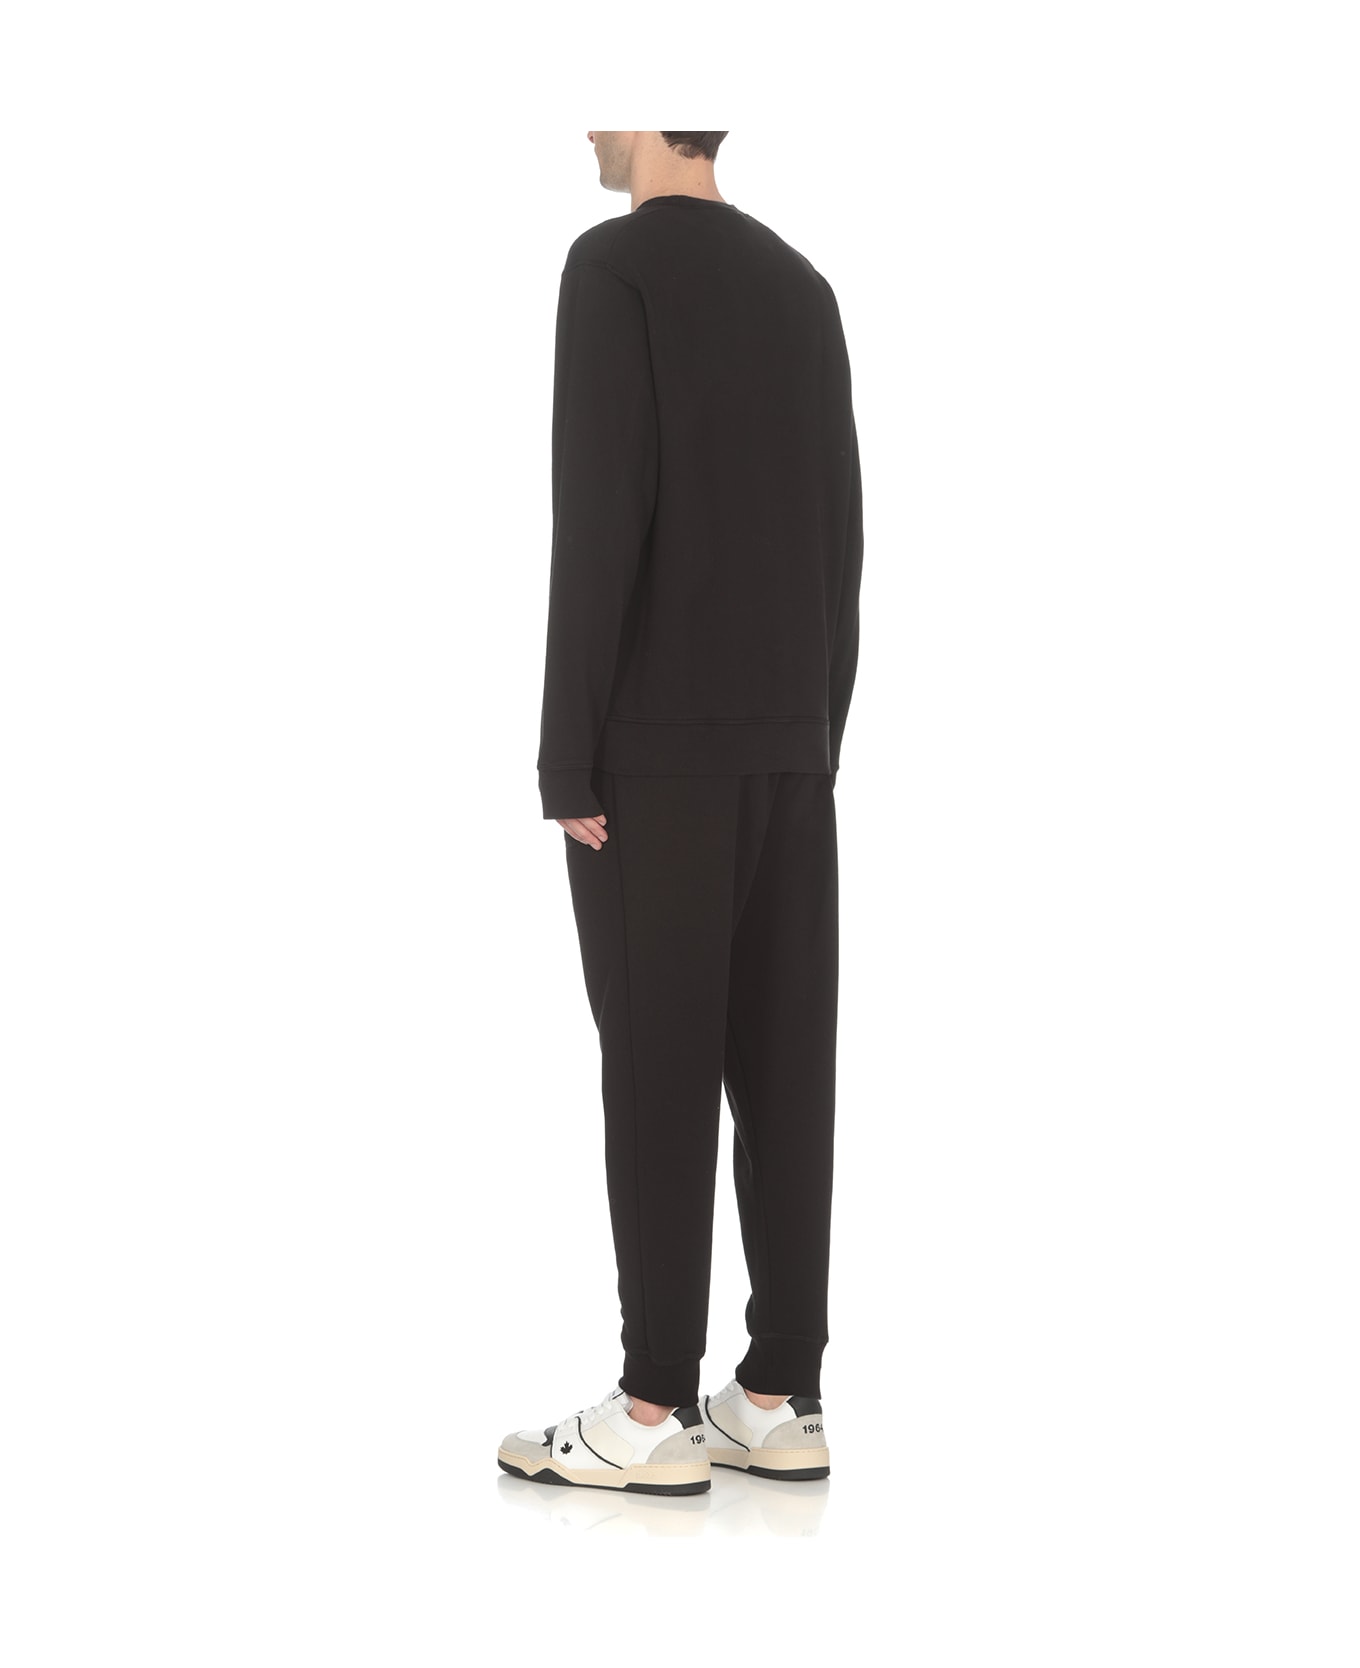 Dsquared2 Icon Forever Sweatpants - black